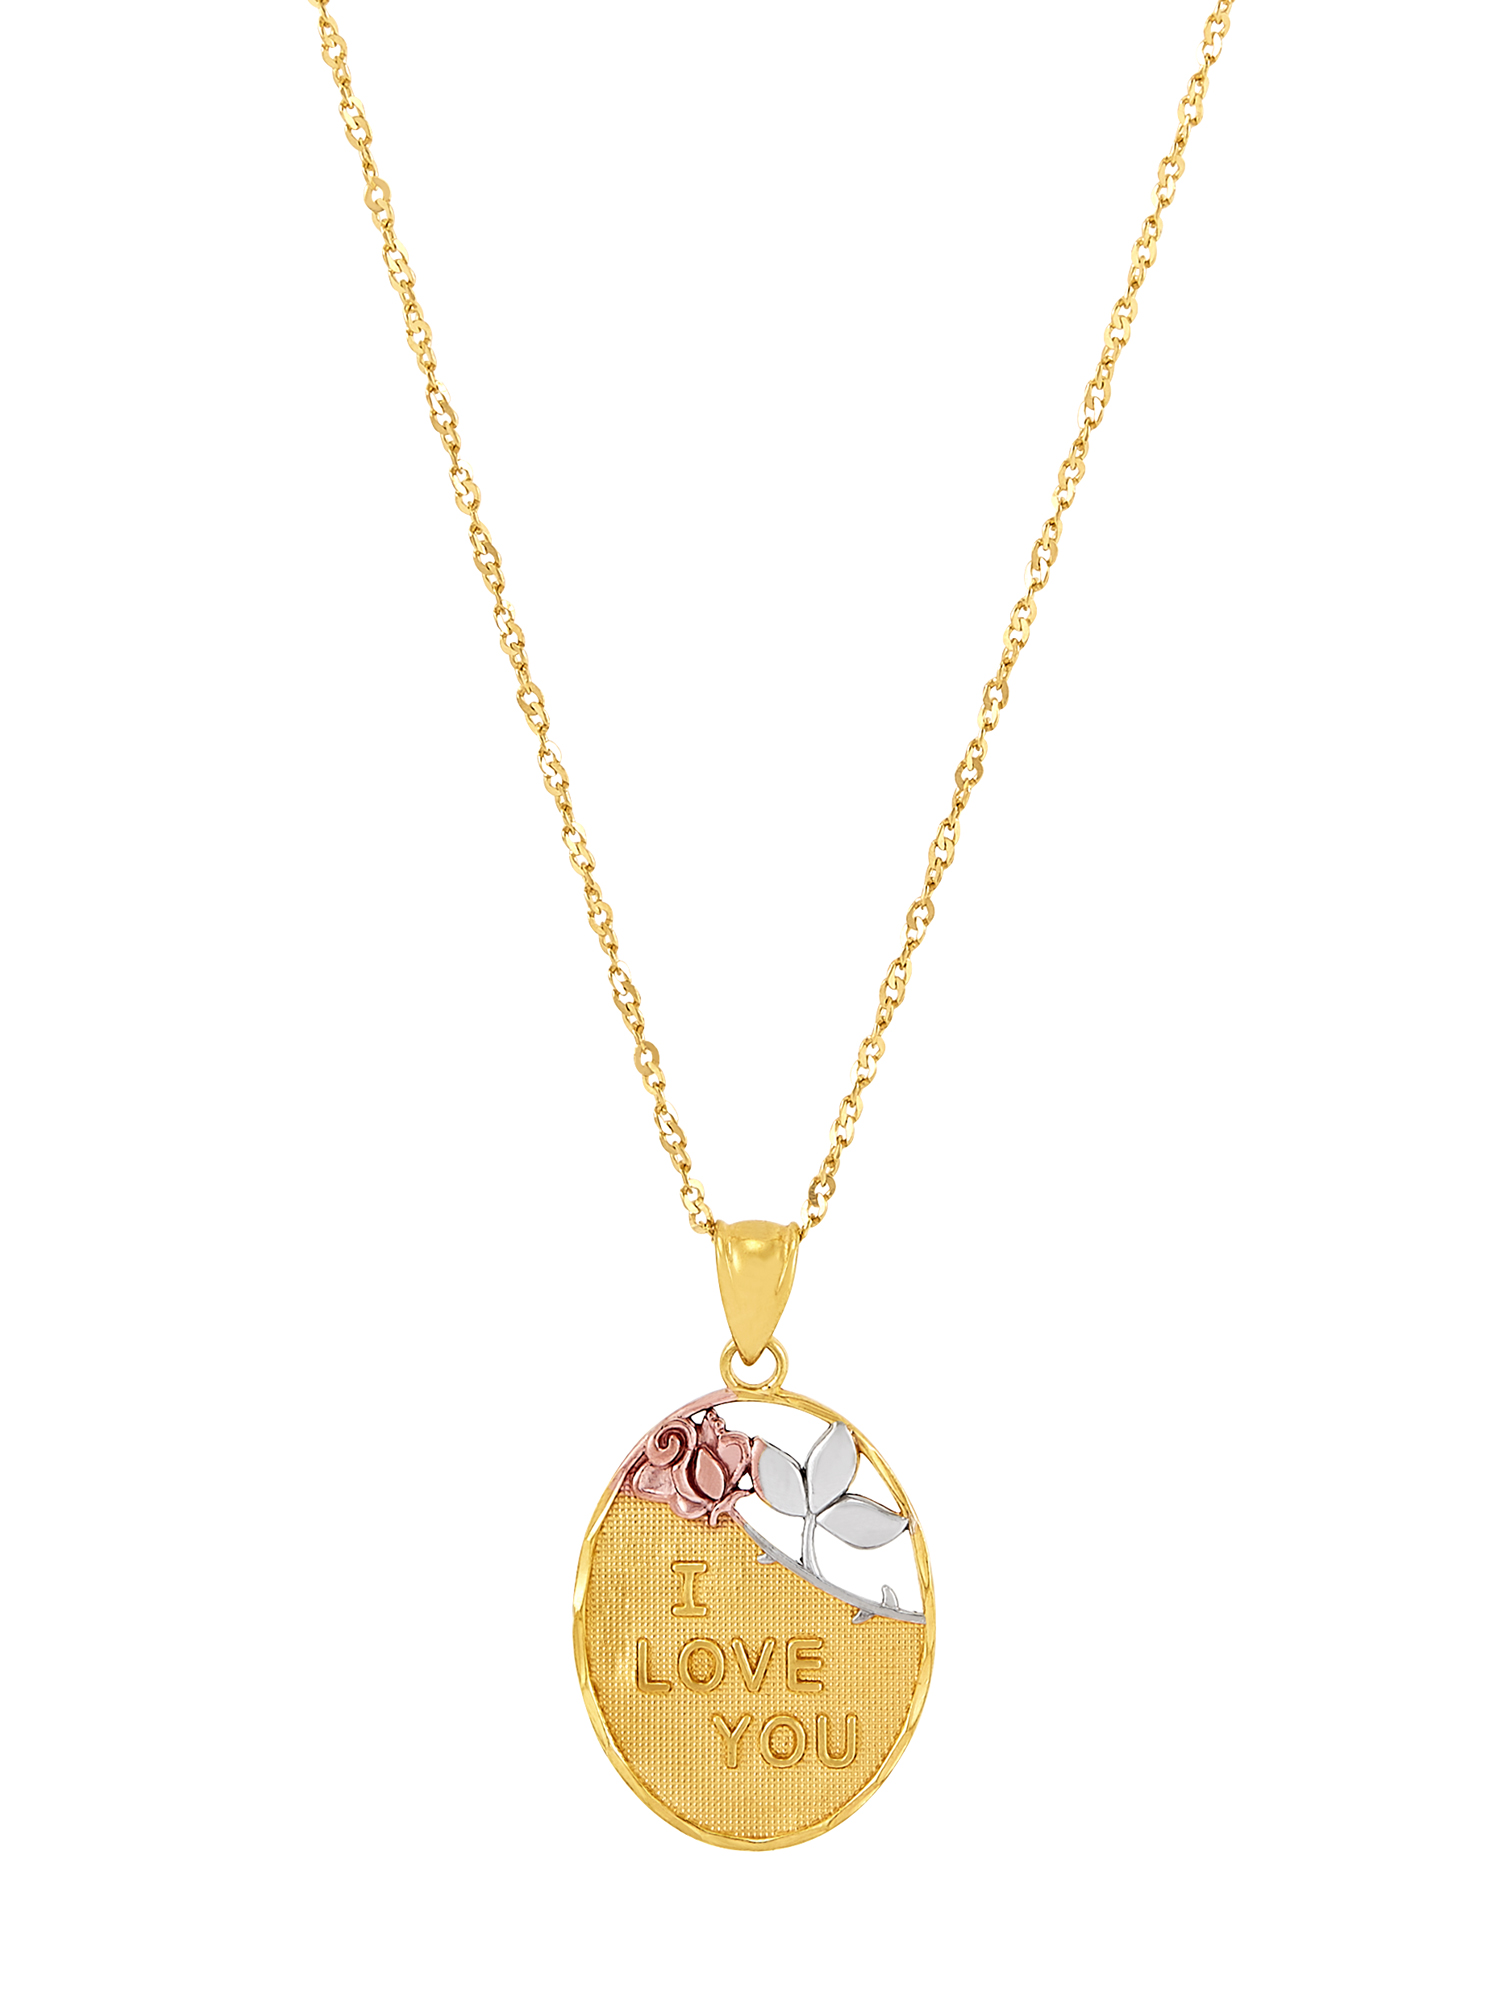 Brilliance Fine Jewelry Sterling Silver and 18K Gold-Plated "I Love You" Oval Pendant, 18" Necklace - image 1 of 4